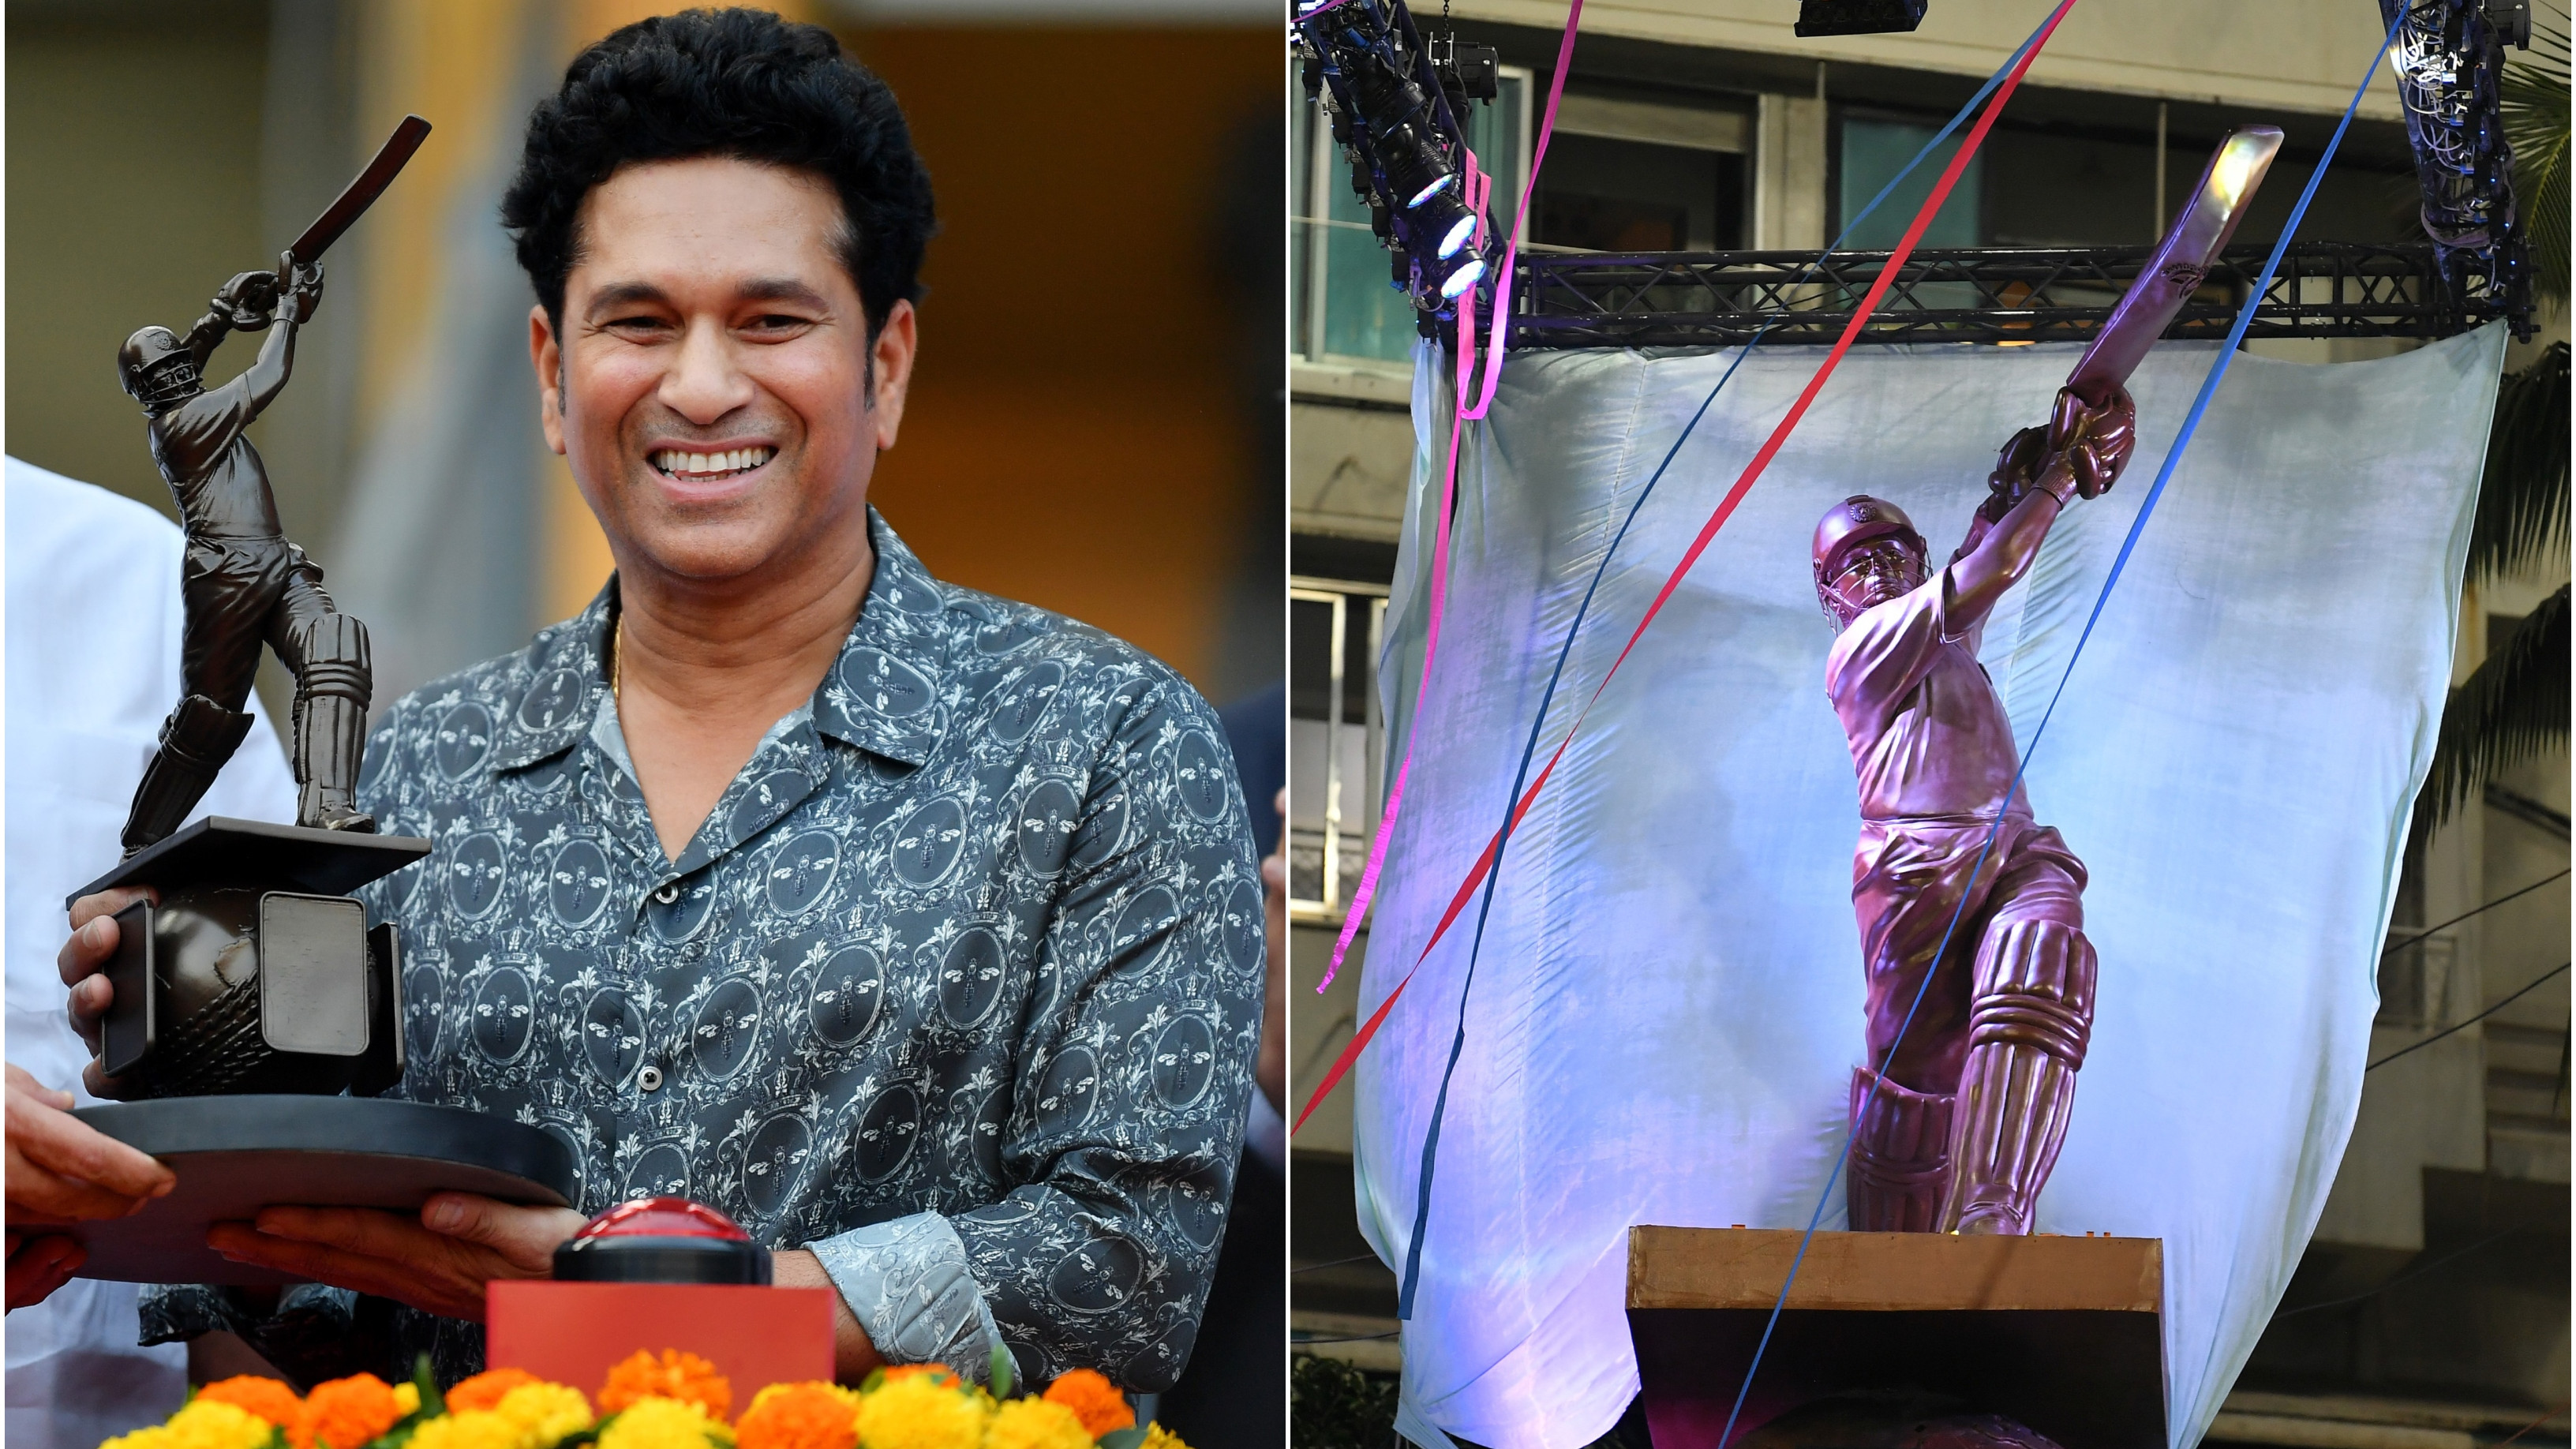 WATCH: Sachin Tendulkar’s life-size statue unveiled in a grand ceremony at the Wankhede Stadium